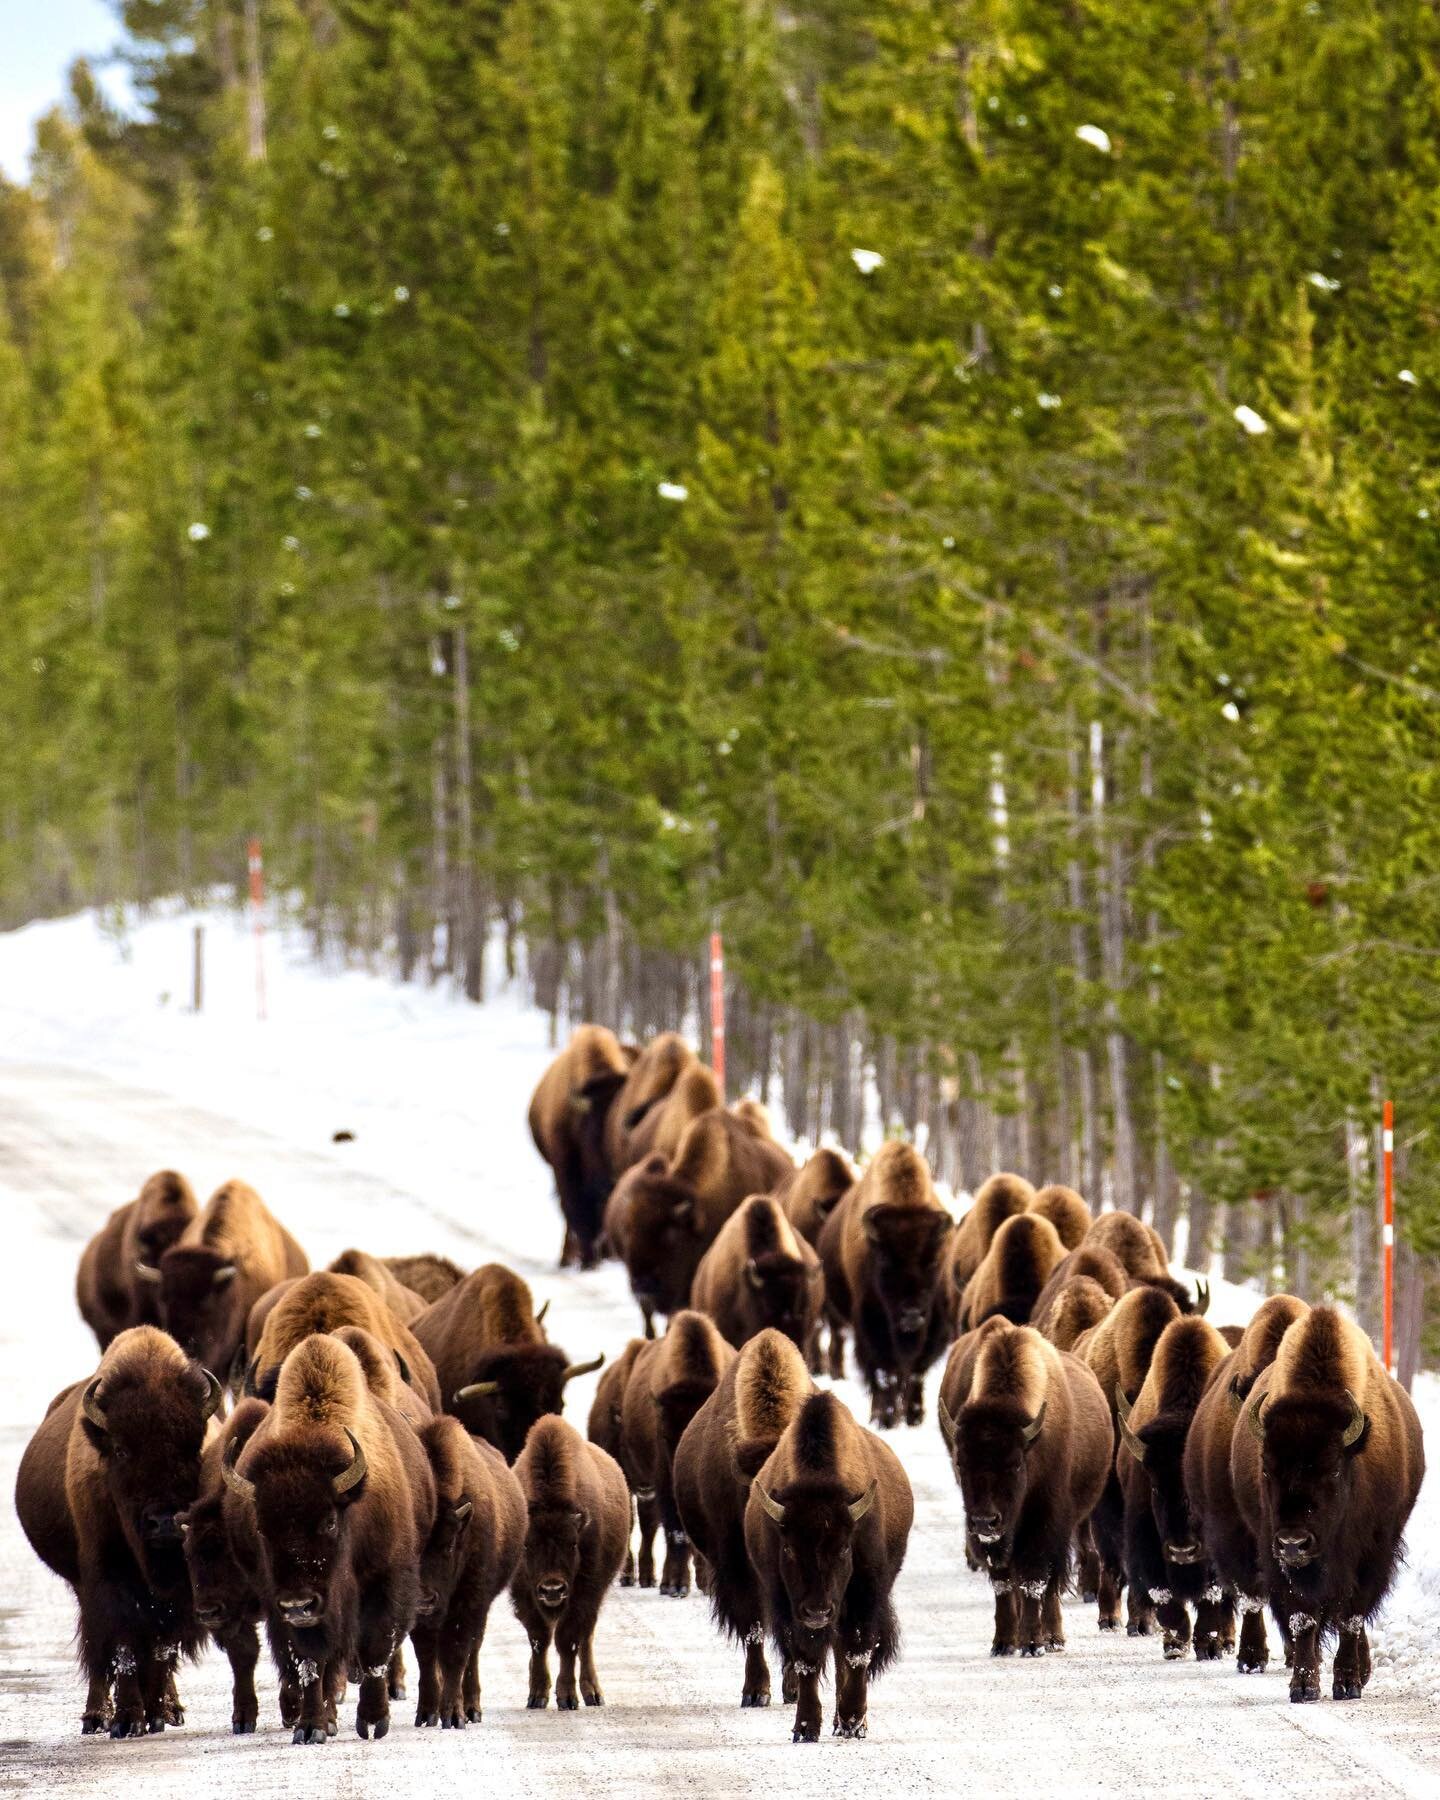 Traffic in Yellowstone is a beautiful sight to see. If you haven&rsquo;t made it to the park in the winter, you are missing out on an incredible experience! #visityellowstone #yellowstonenationalpark #yellowstonepark #yellowstonecountry #yellowstonec